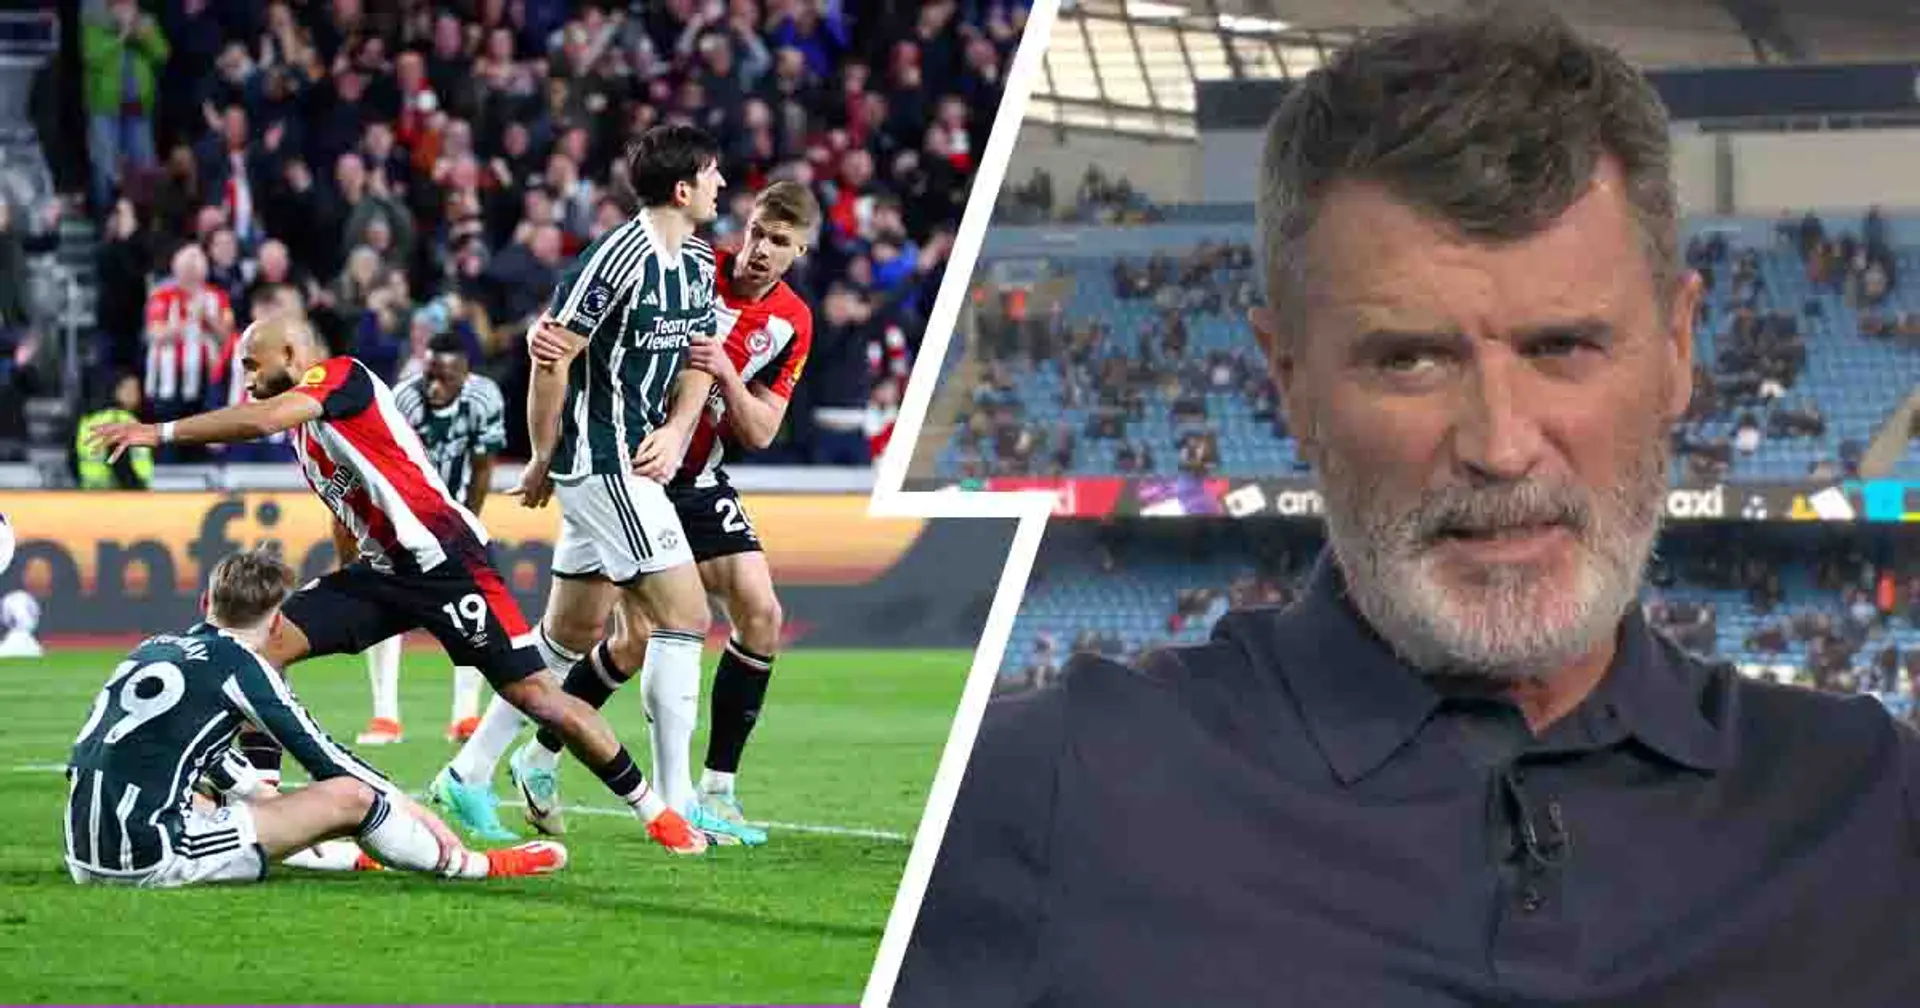 'You don't know who is going to turn up': Roy Keane issues stern warning to Man United before Liverpool clash